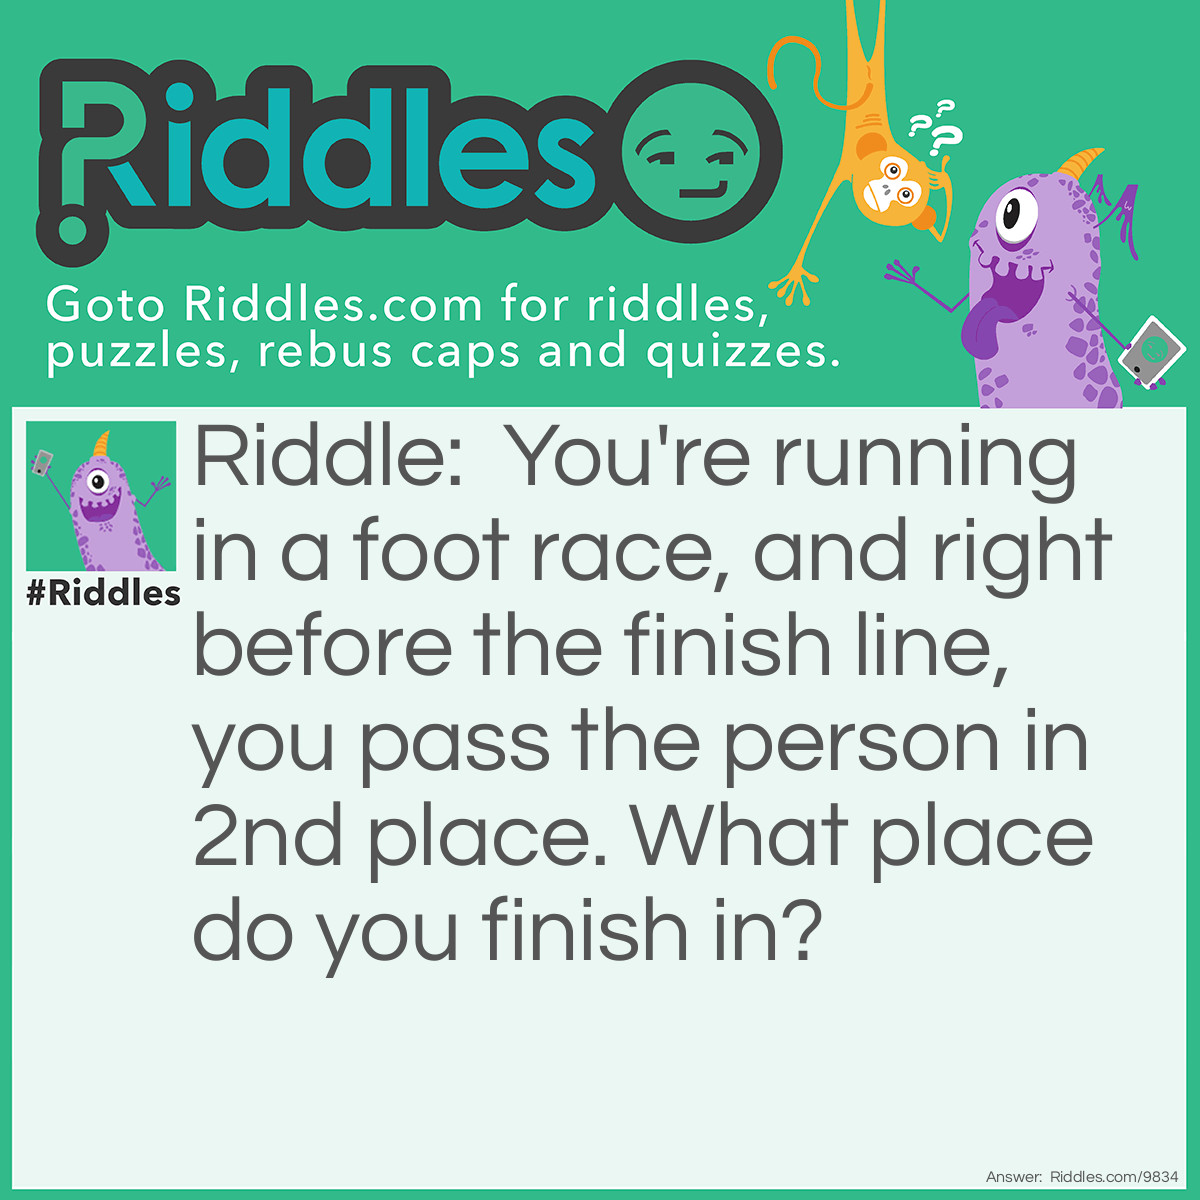 Riddle: You're running in a foot race, and right before the finish line, you pass the person in 2nd place. What place do you finish in? Answer: Second place.